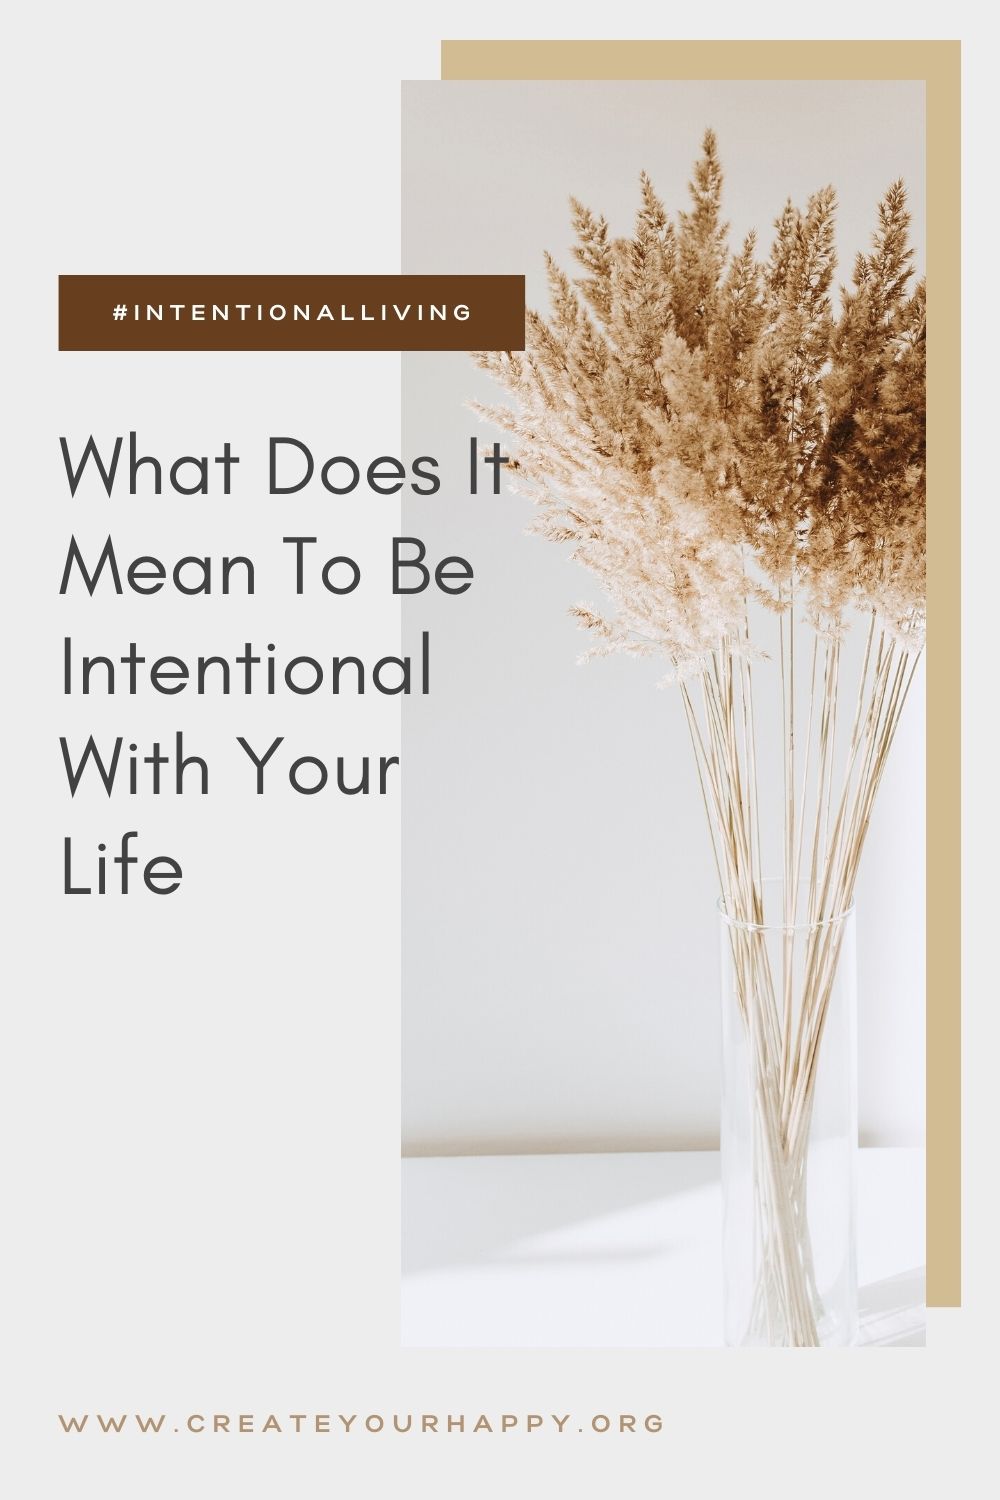 What Does It Mean to Be Intentional with Your Life?